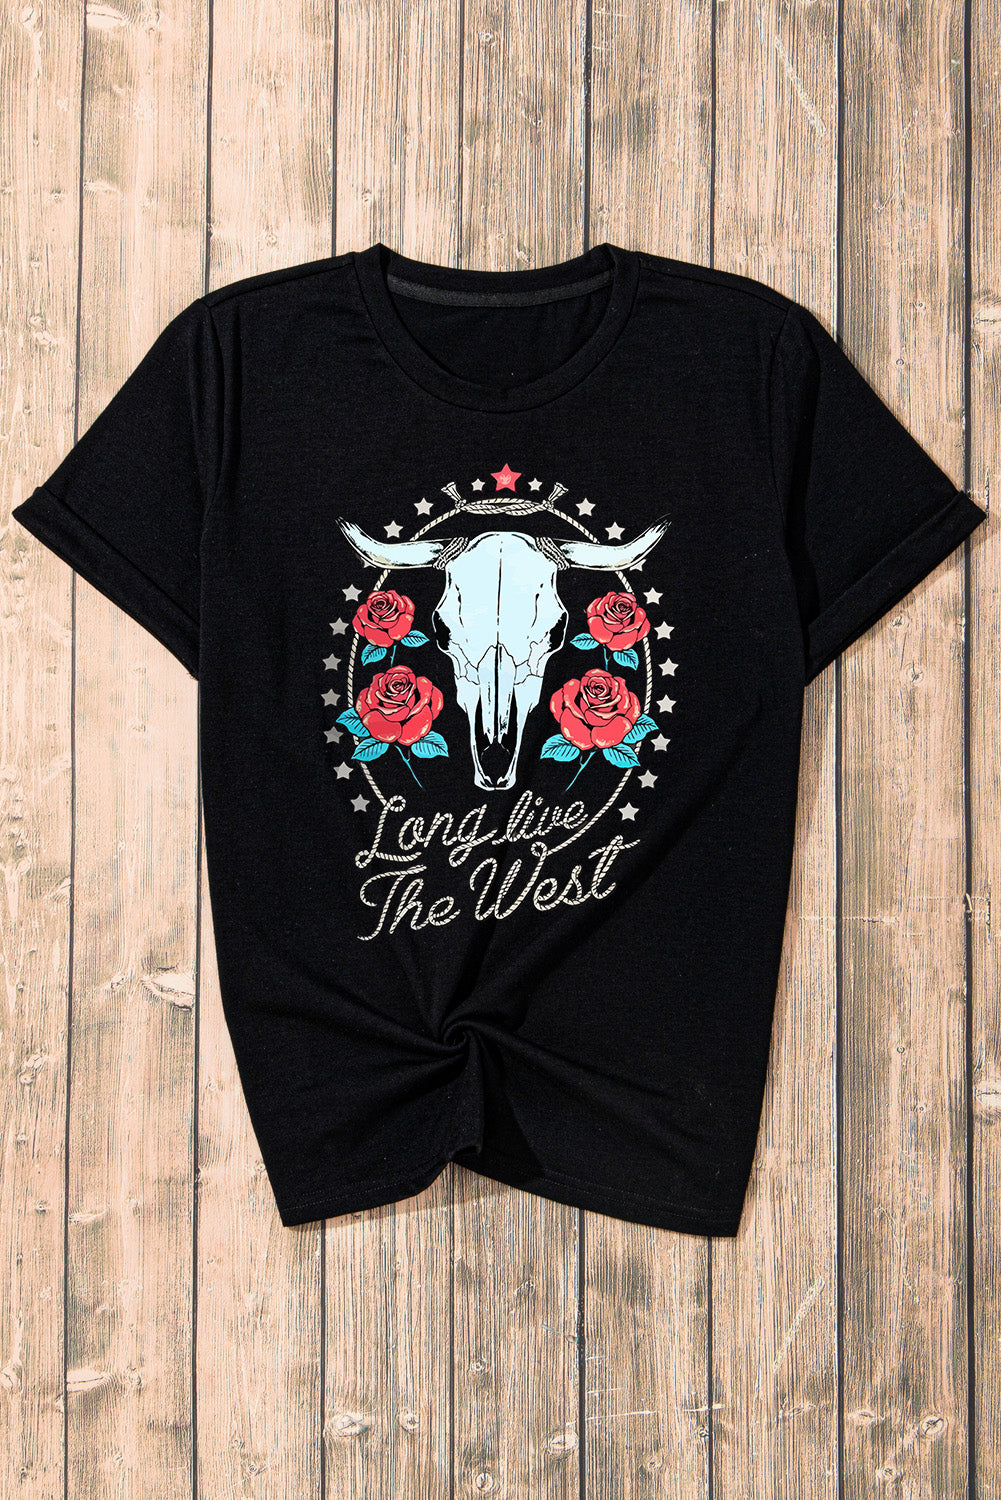 Long Live the West Graphic Round Neck Short Sleeve T-Shirt